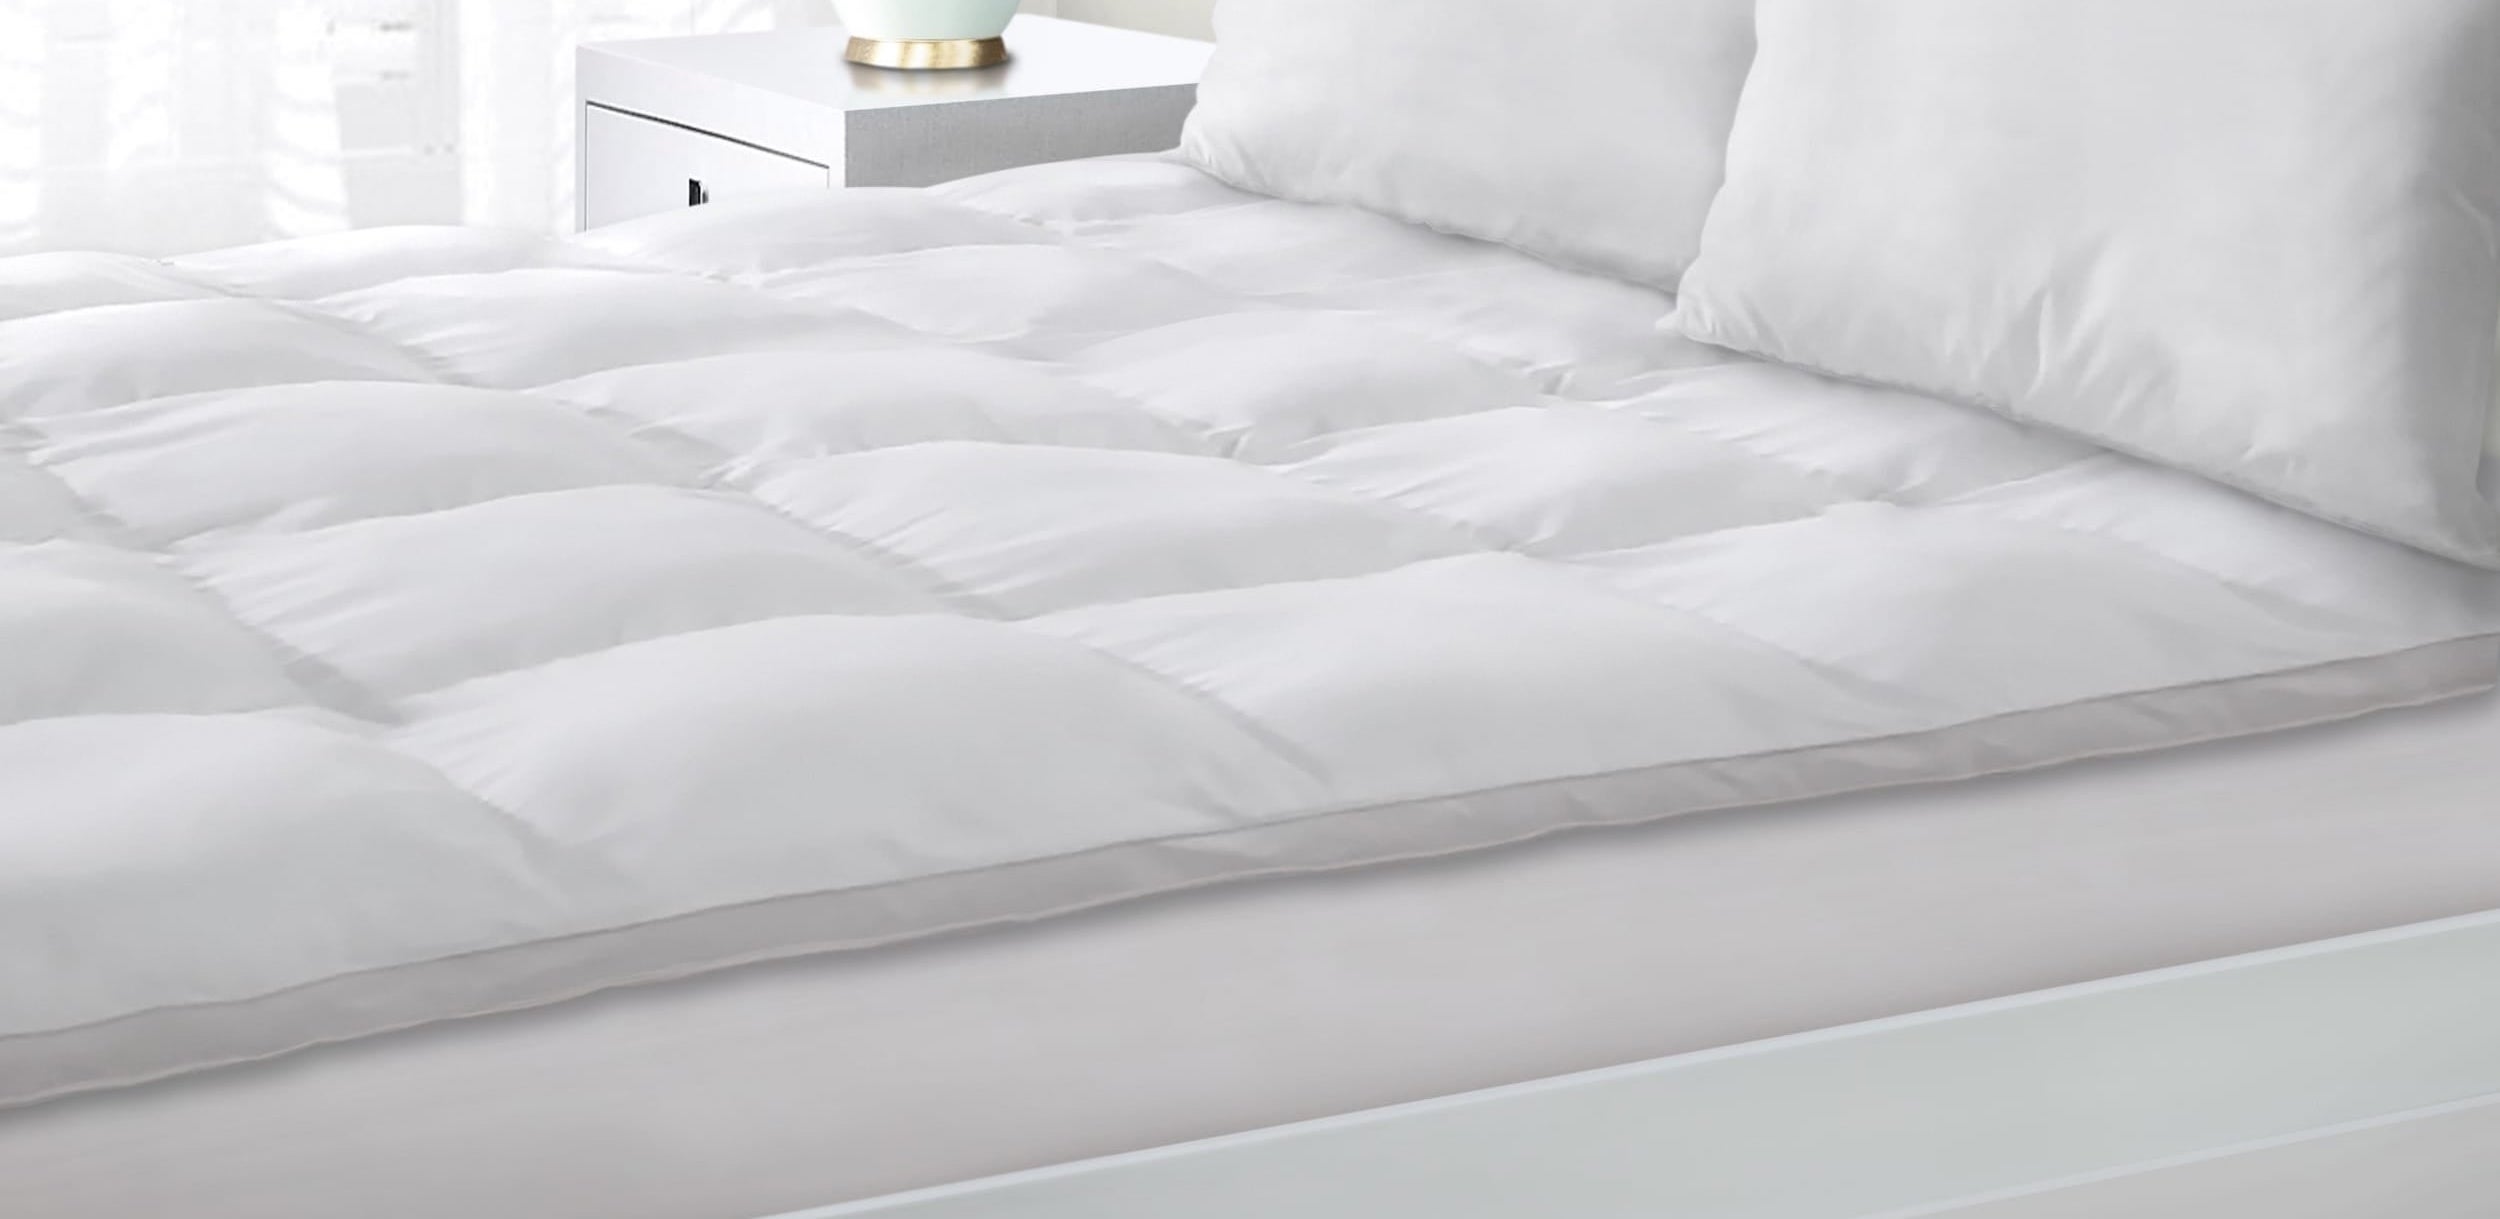 mattress protector shiny side up or down